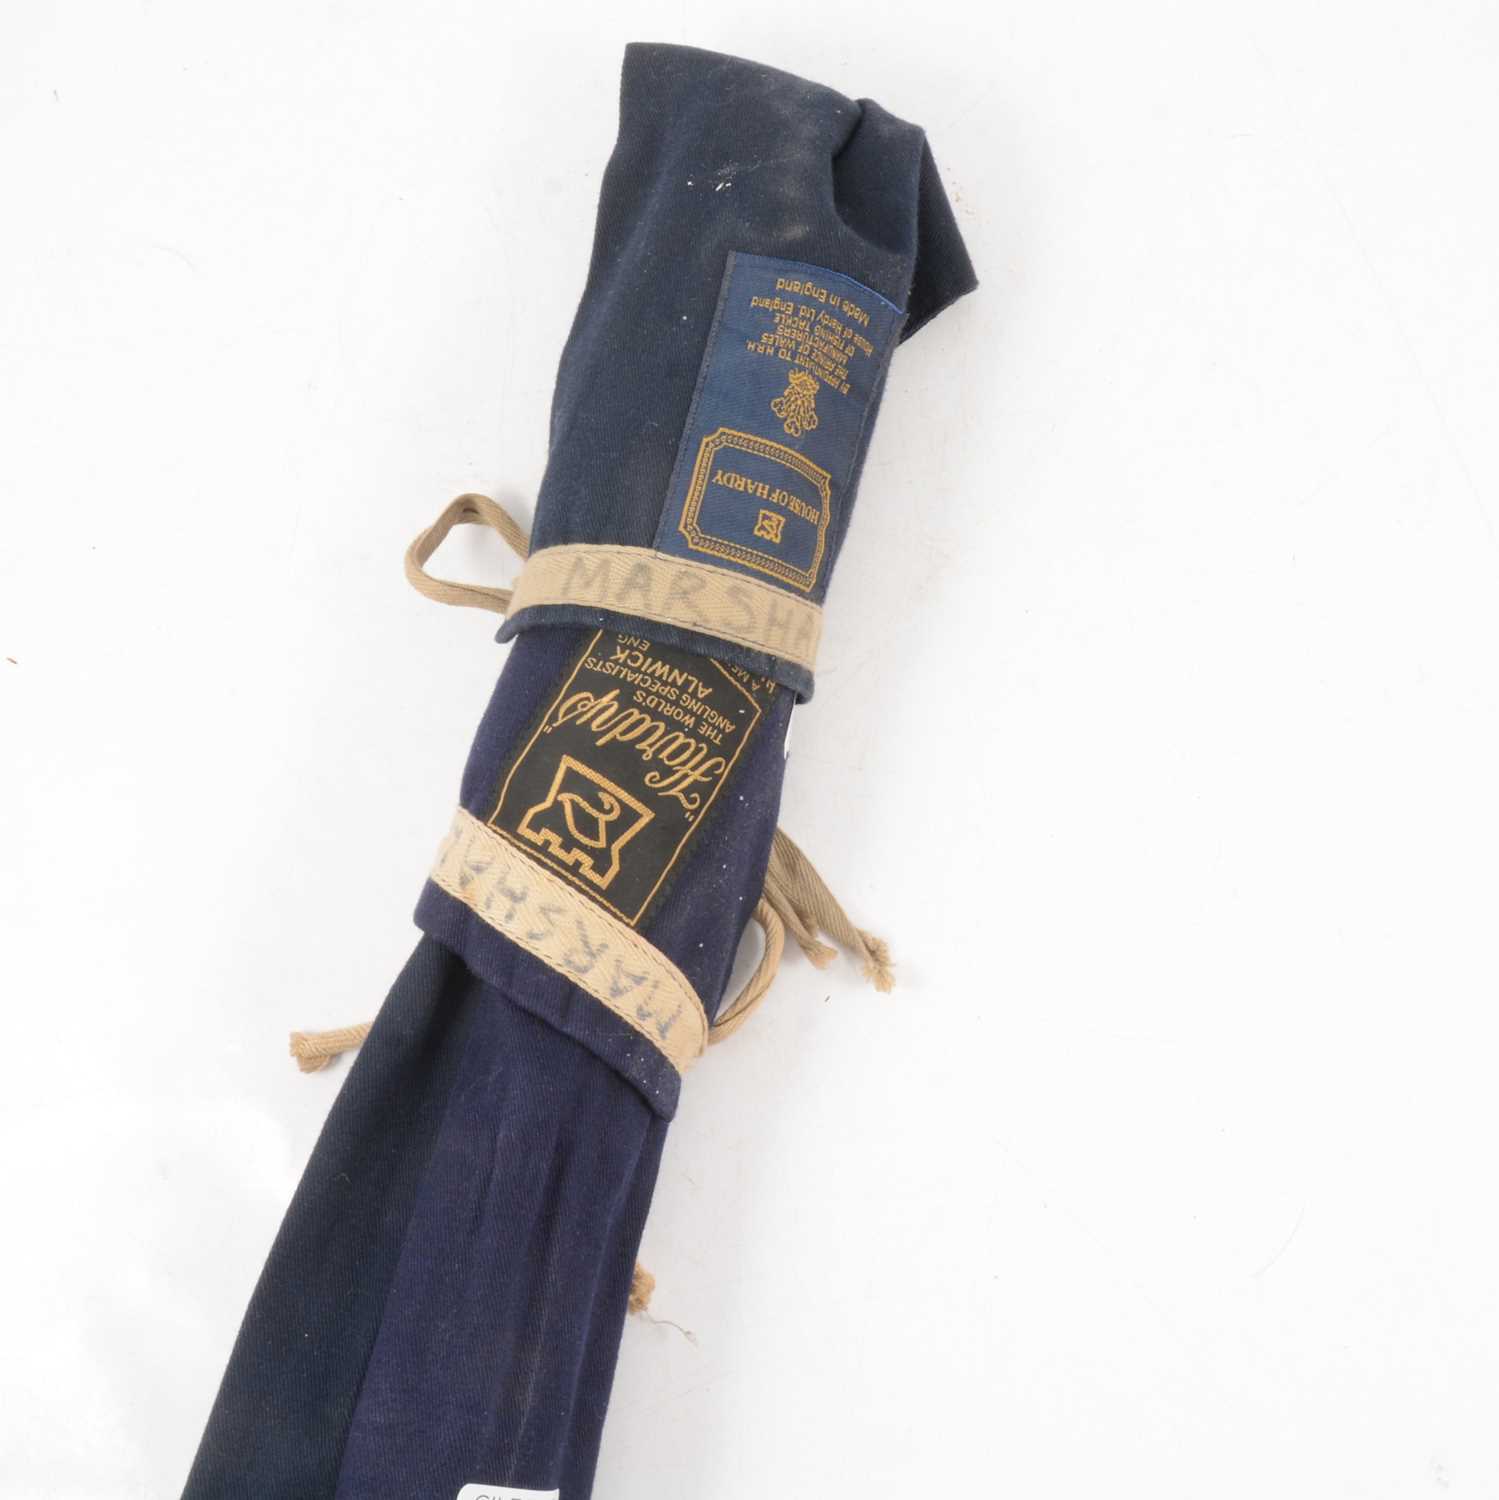 Lot 169 - Two Hardy carbon fibre spinning rods